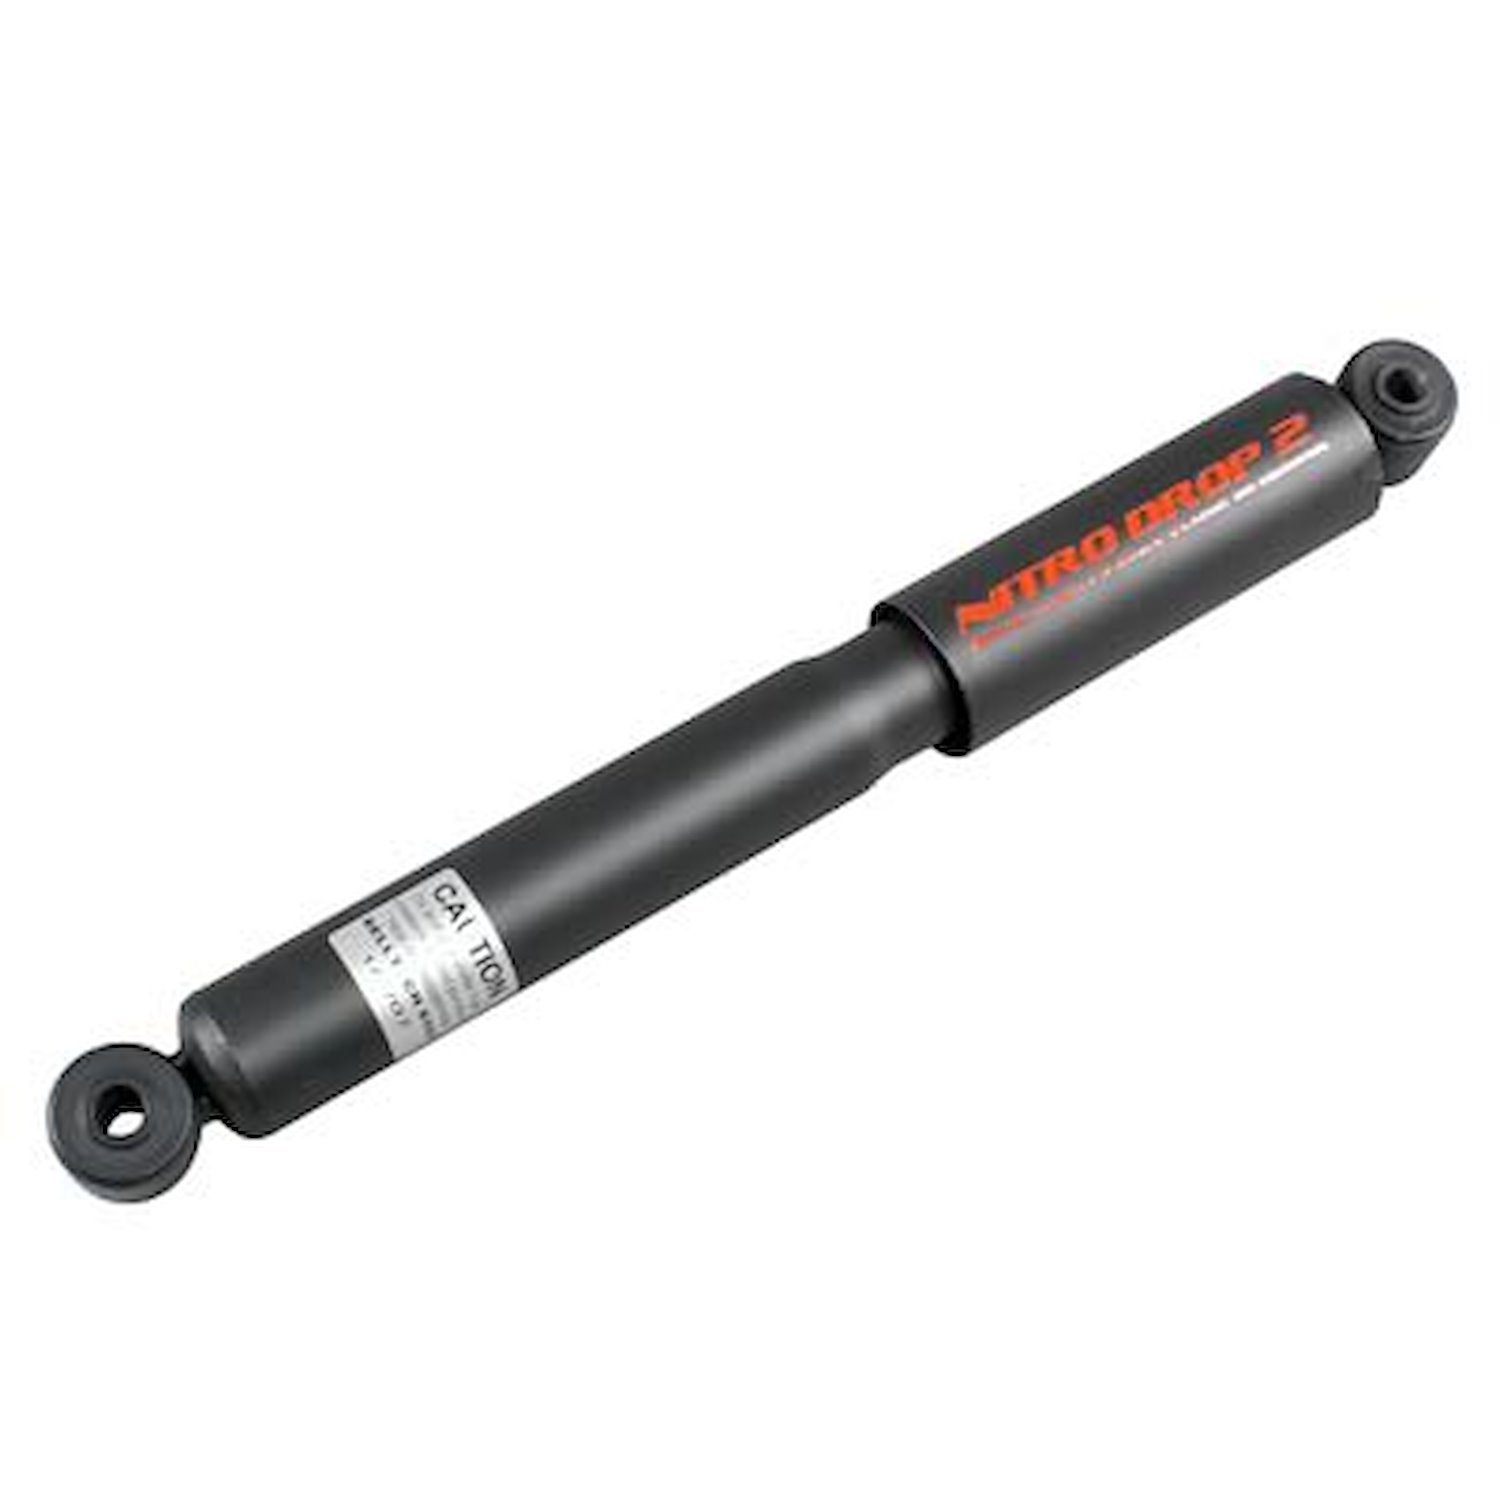 Street Performance Shock Set includes (2) 146-10101I Front Shocks and (2) 146-2210IF Rear Shocks